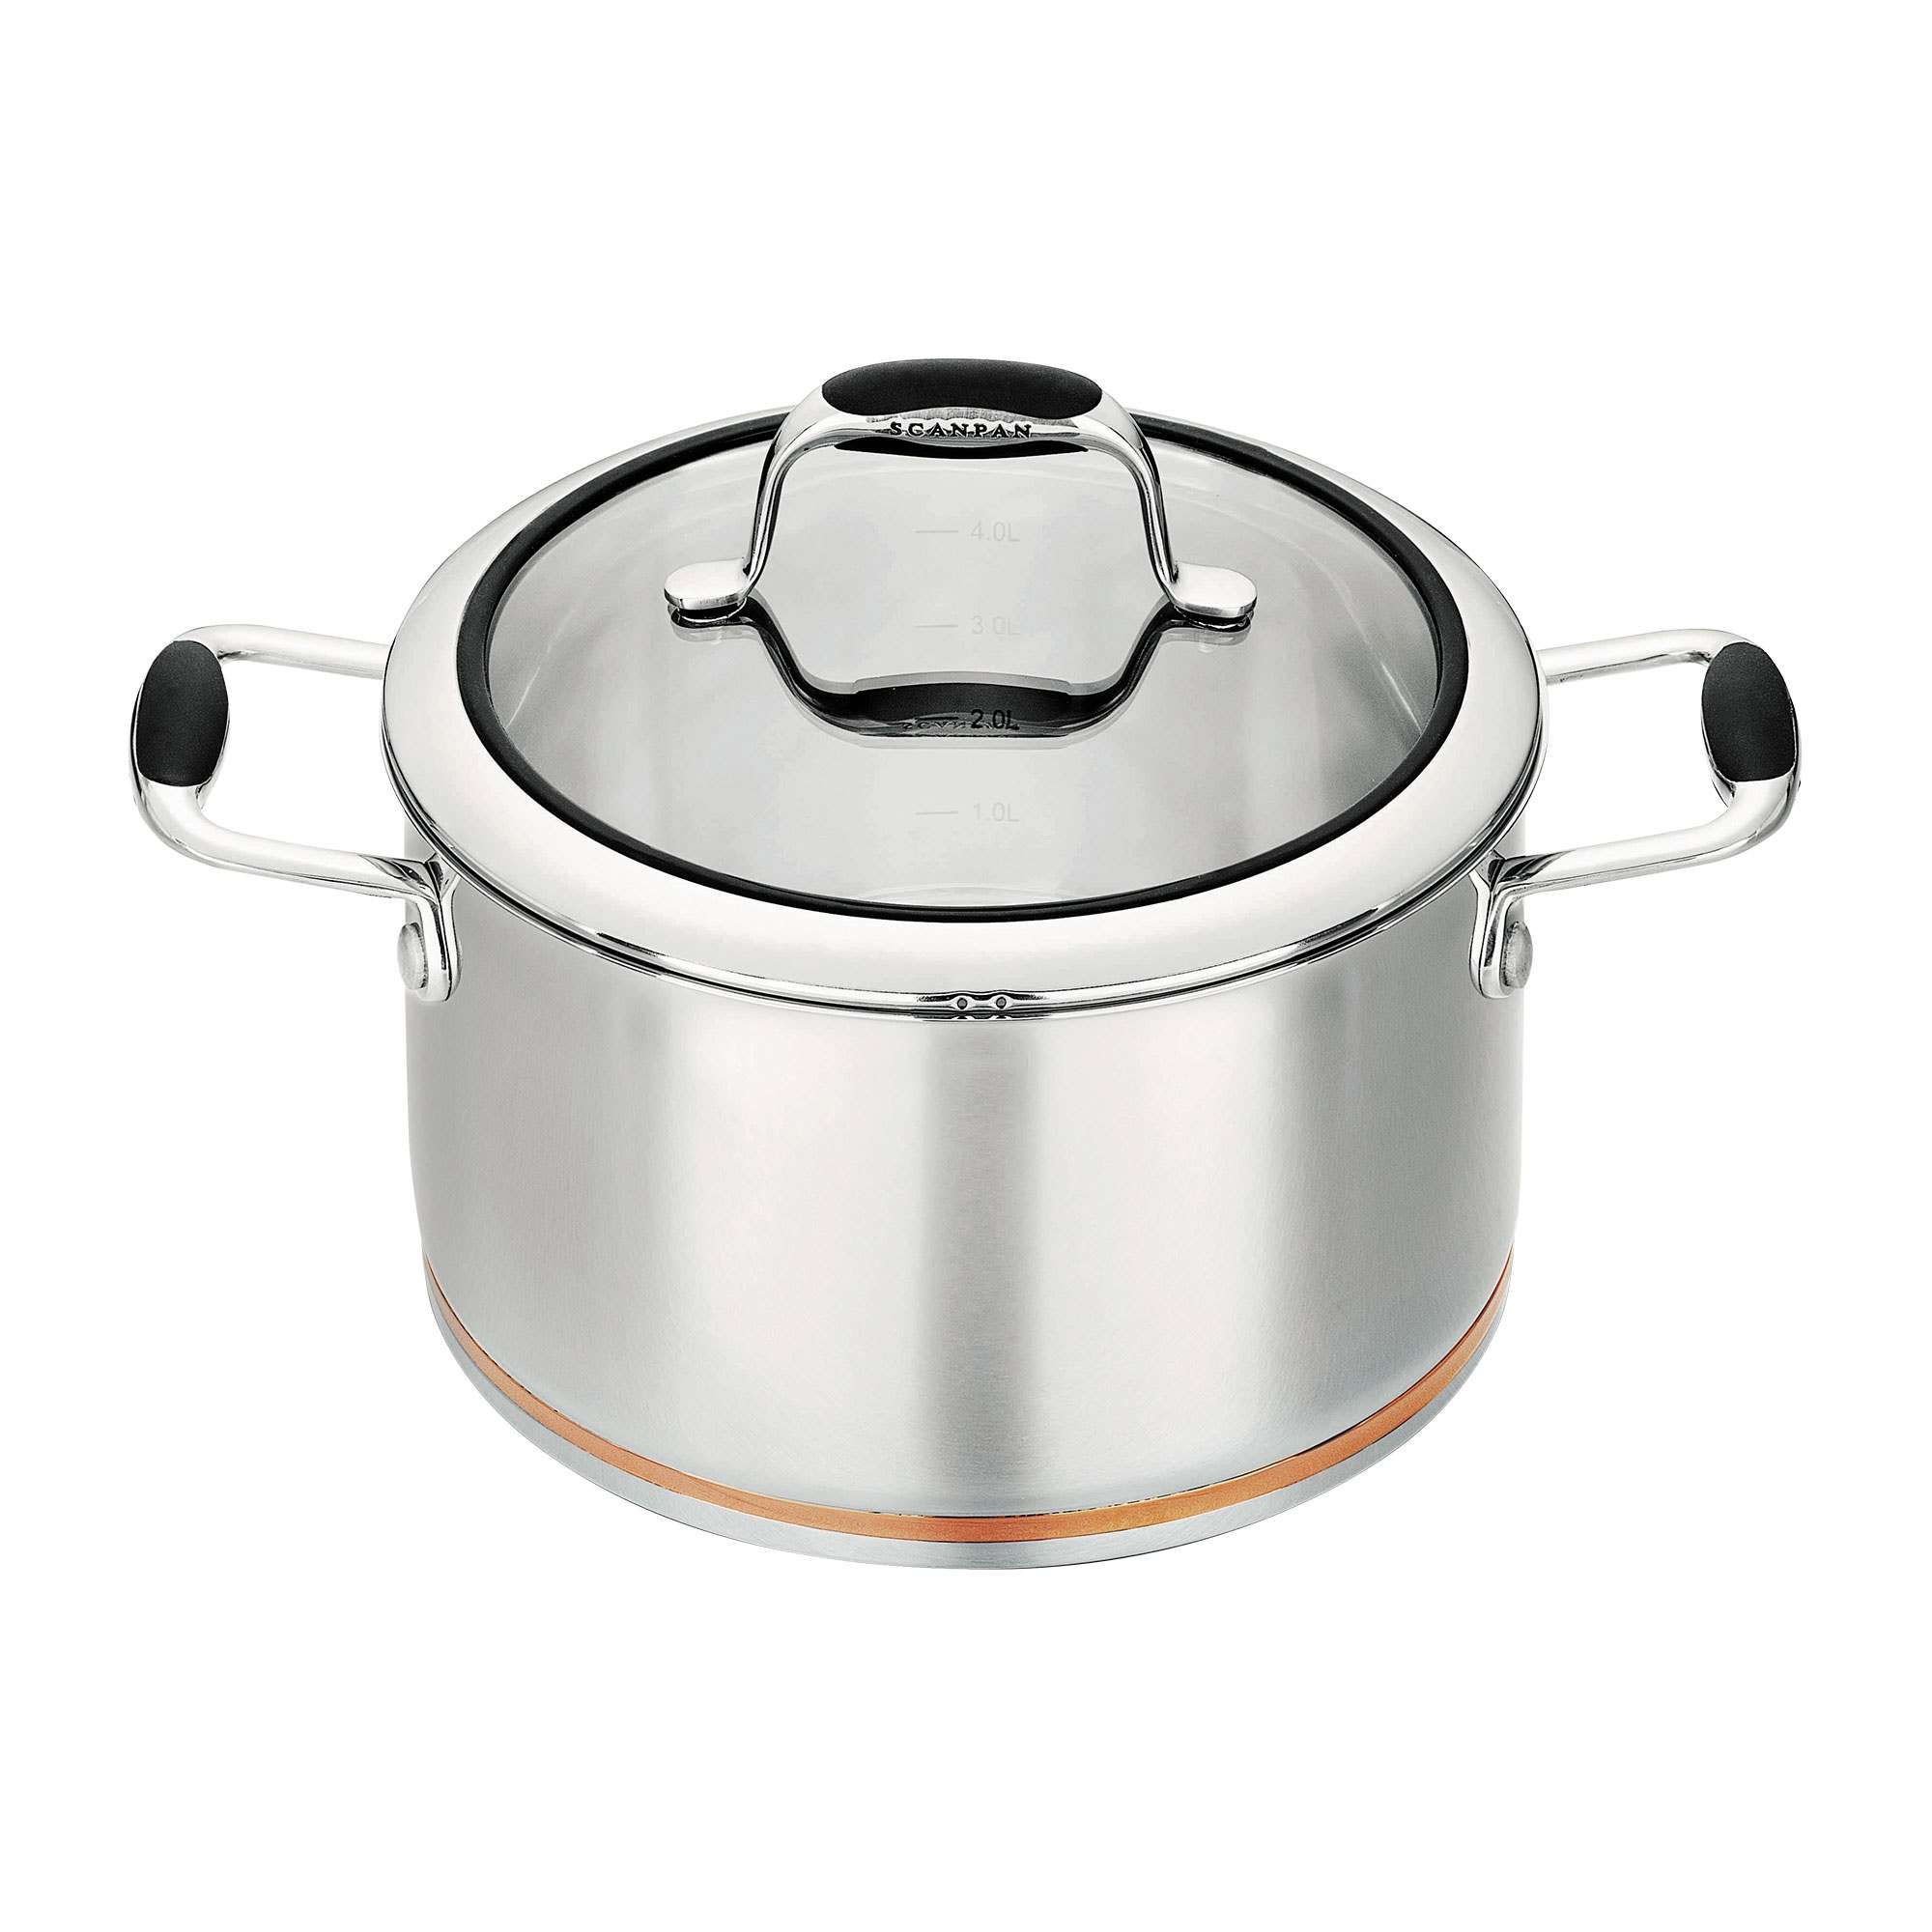 Scanpan Coppernox Covered Dutch Oven 4.8L Image 1